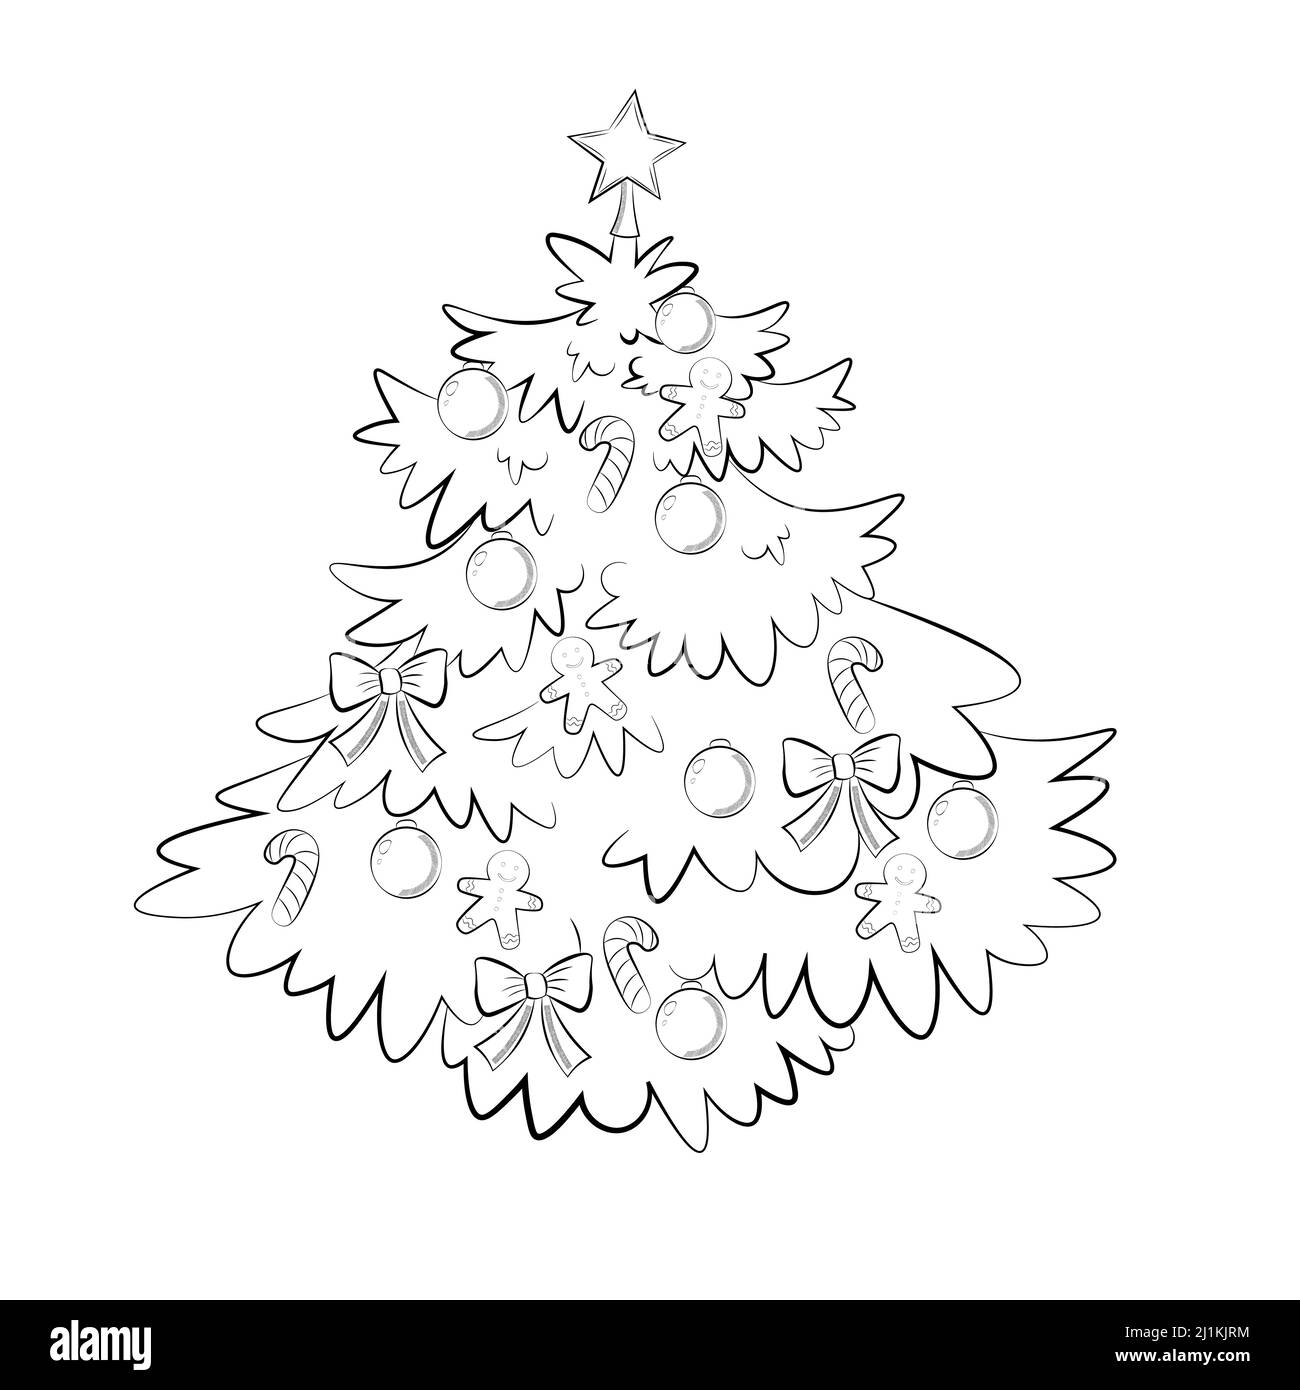 Decorated christmas tree line art isolated on white background. Vector illustration. Stock Vector